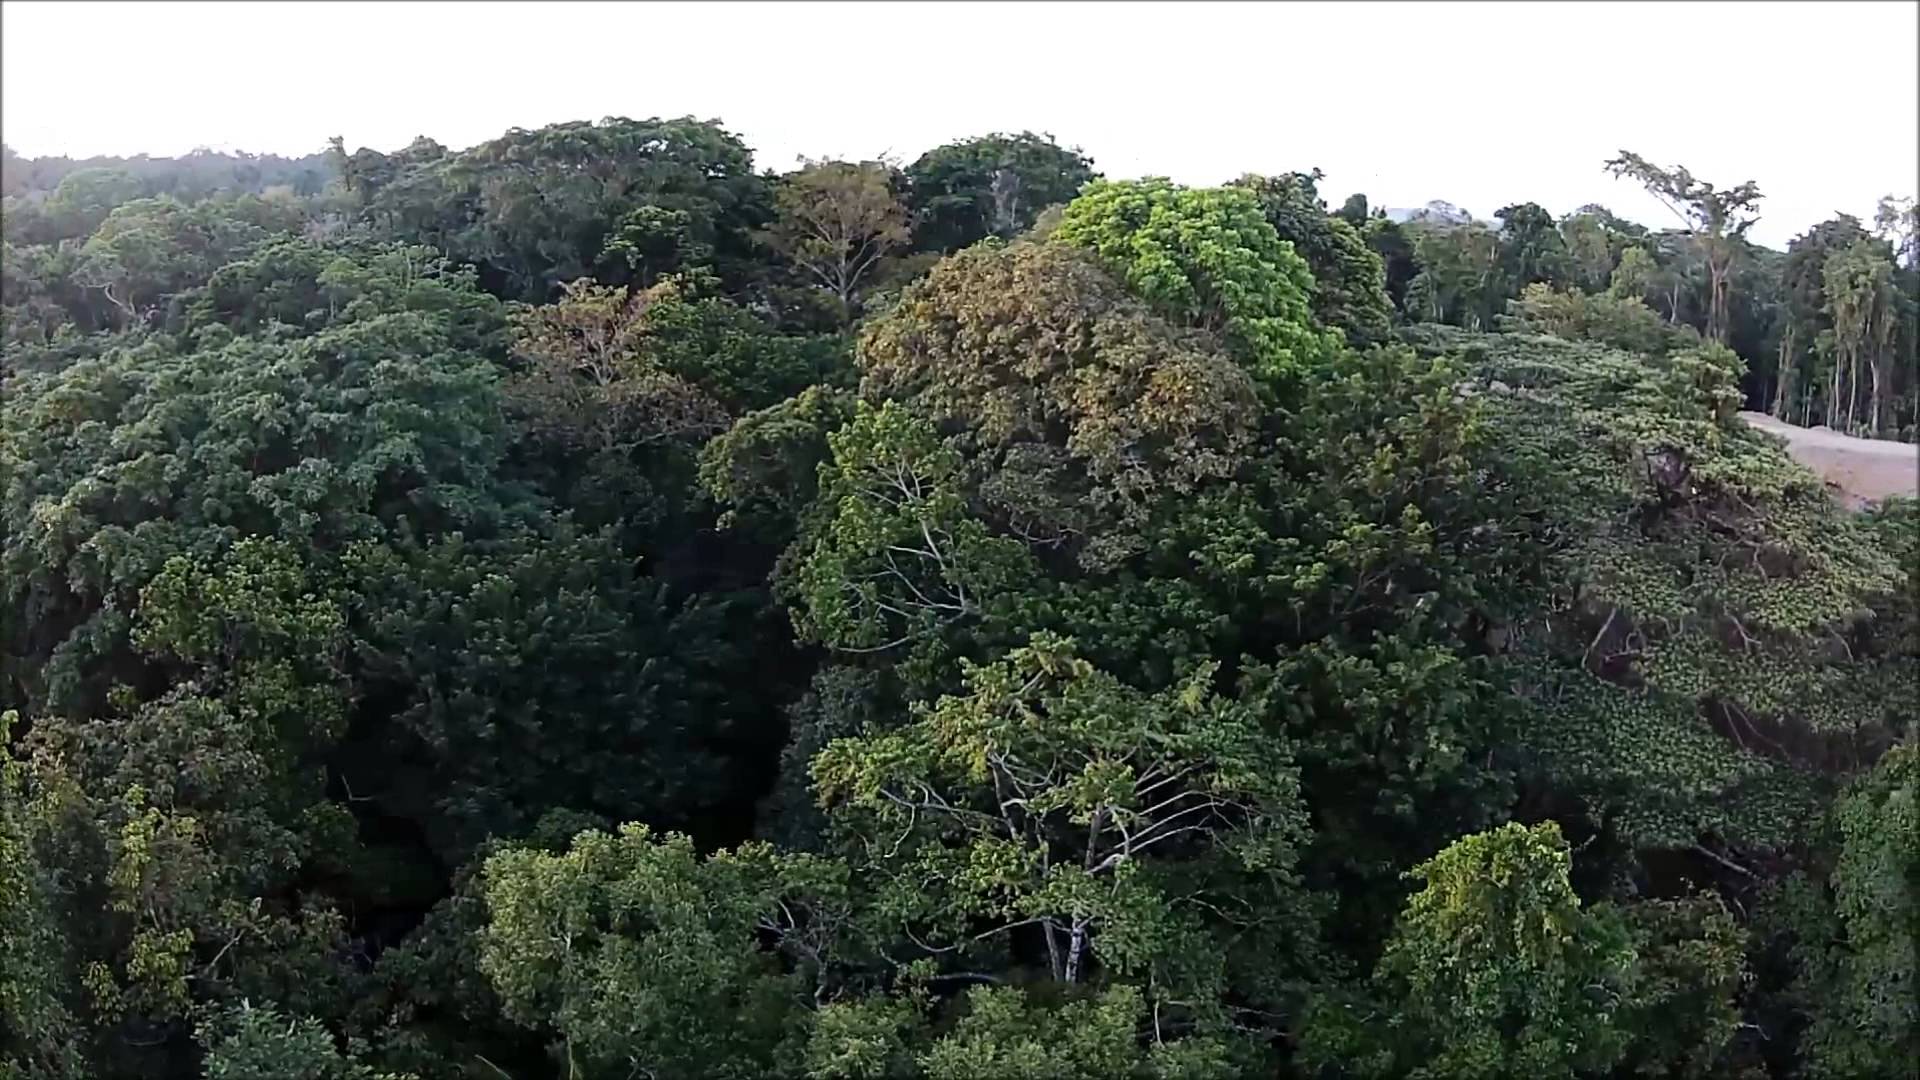 Drone Flight Over Png Jungle At Sunset - Dschungel, Transparent background PNG HD thumbnail